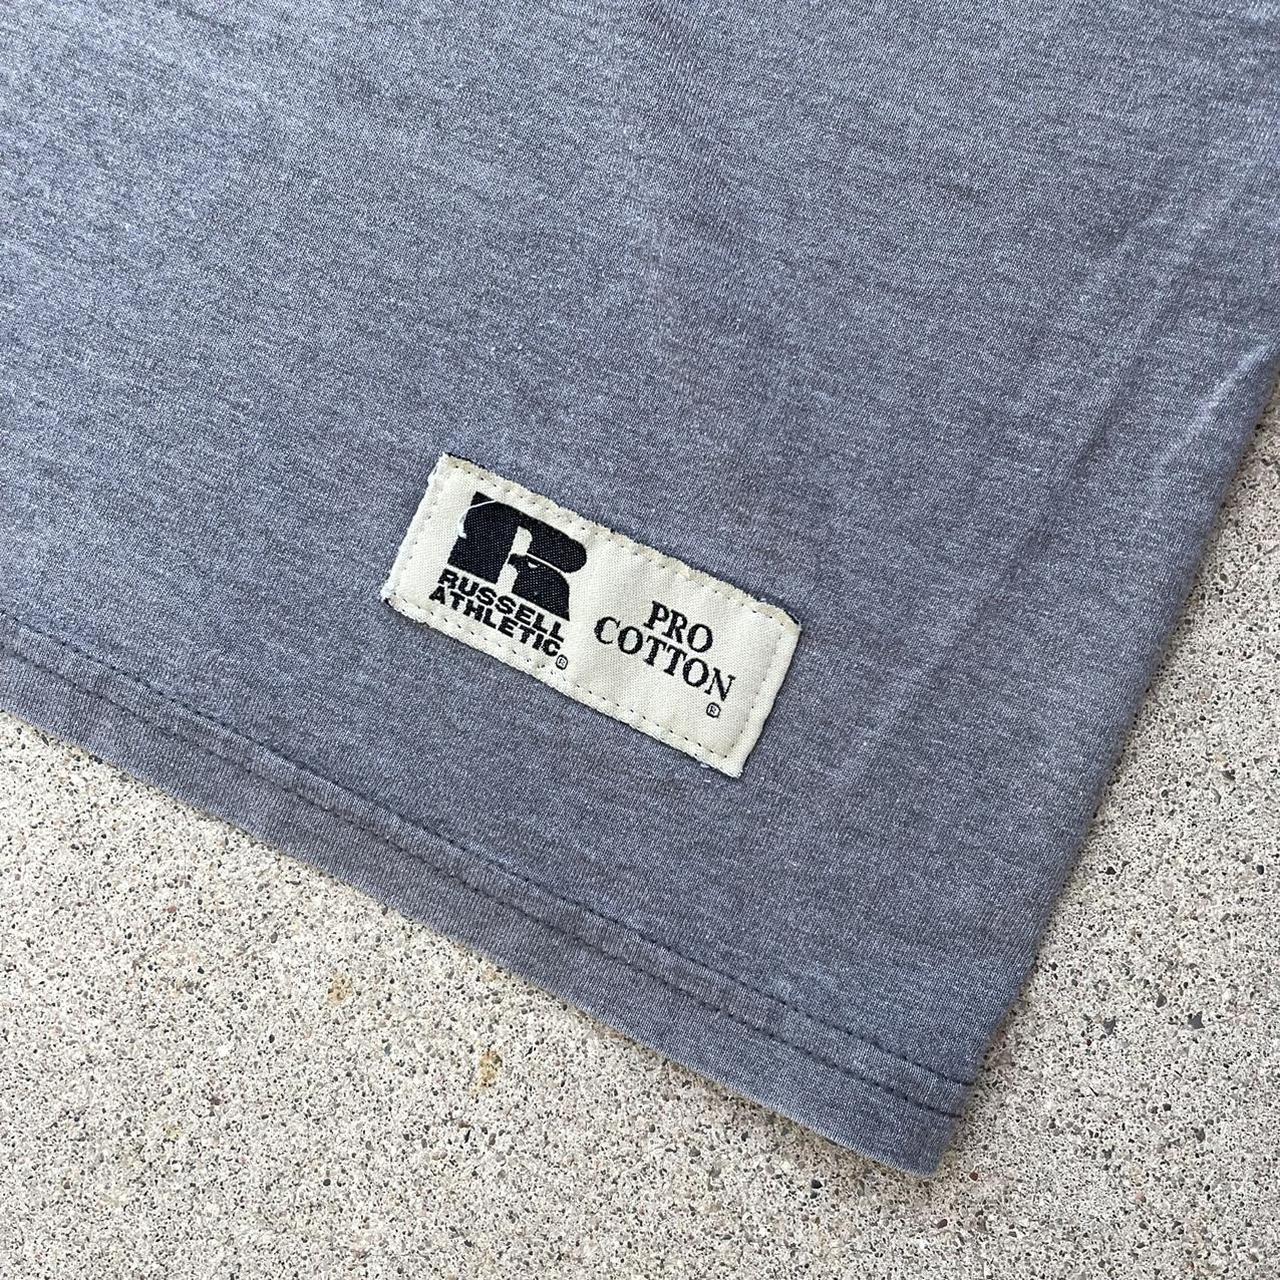 1990s Russell Pro Cotton faded gray blank - Depop